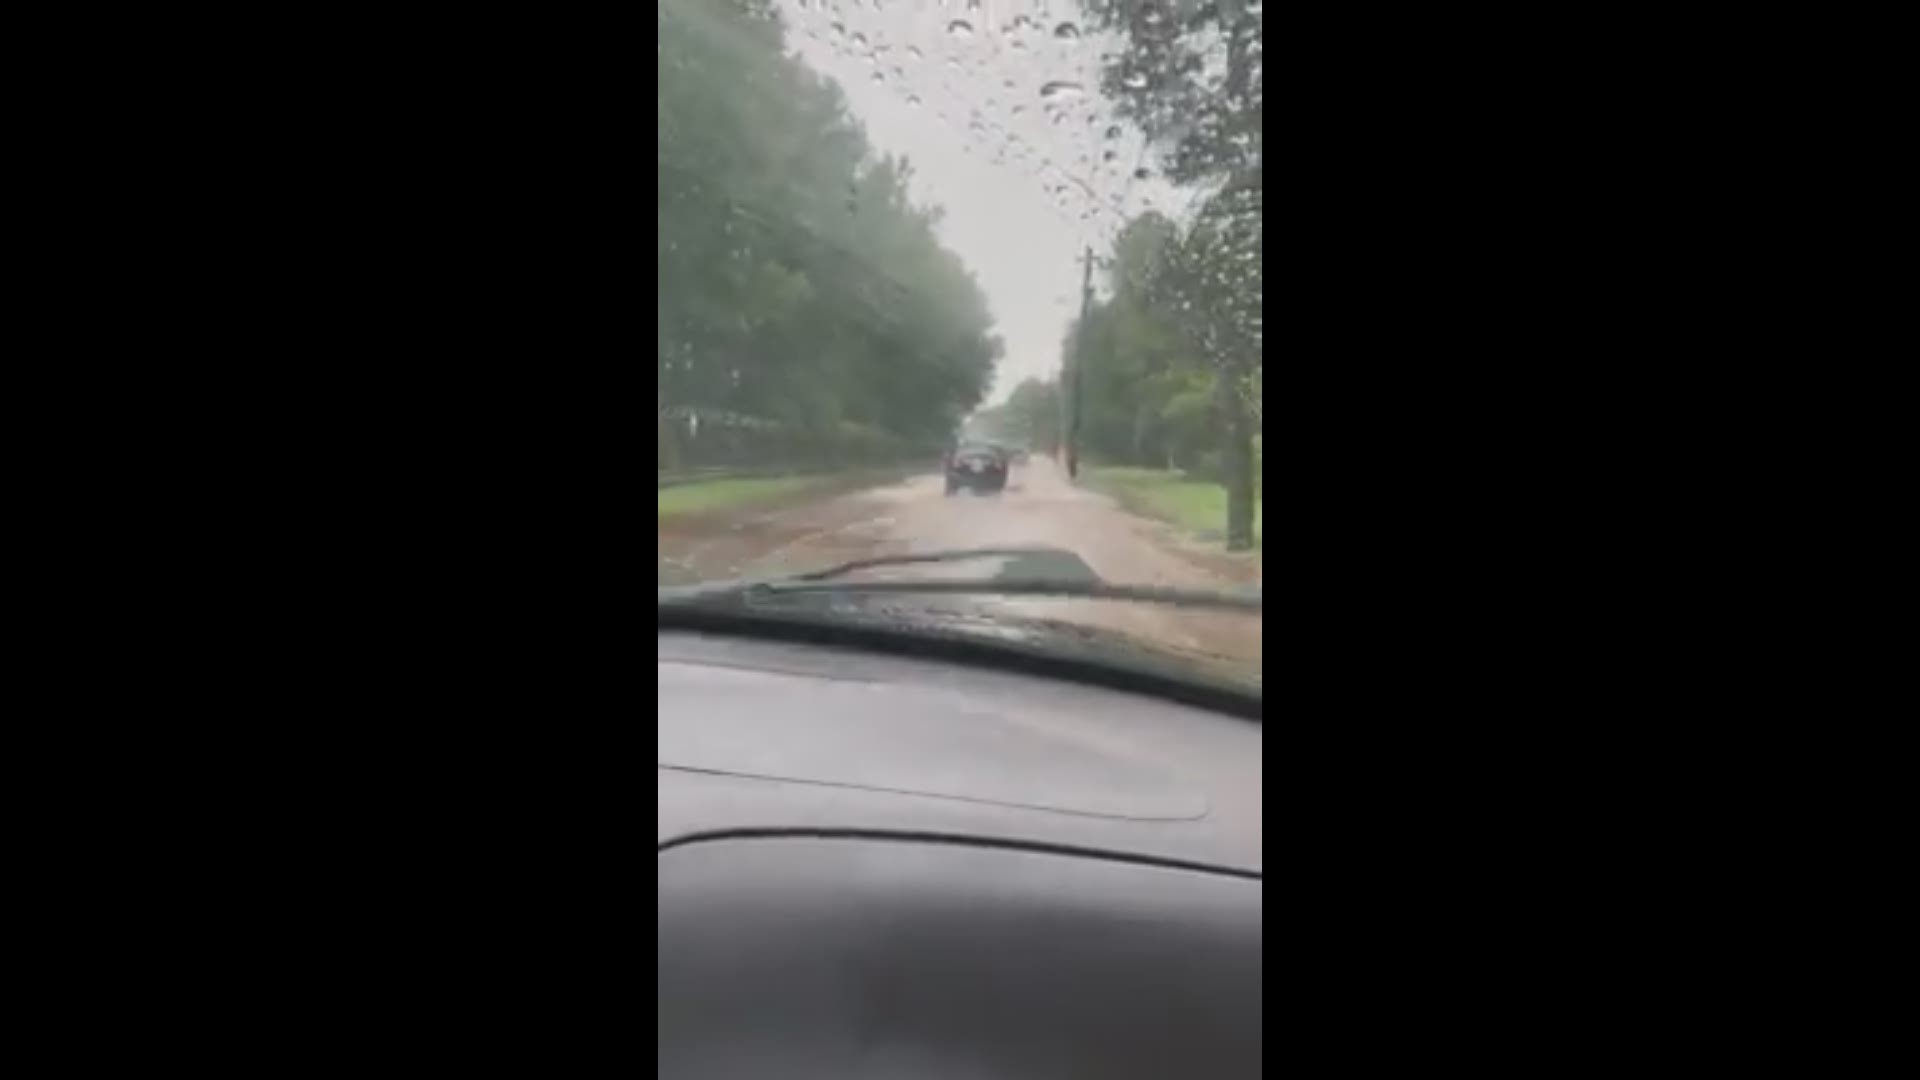 Sherita Gordon from the 11Alive Storm Trackers Facebook group sent us this video of high water near the corner of Jonesboro Road and Constitution Road in southeast Atlanta on Friday afternoon, July 19, 2019.